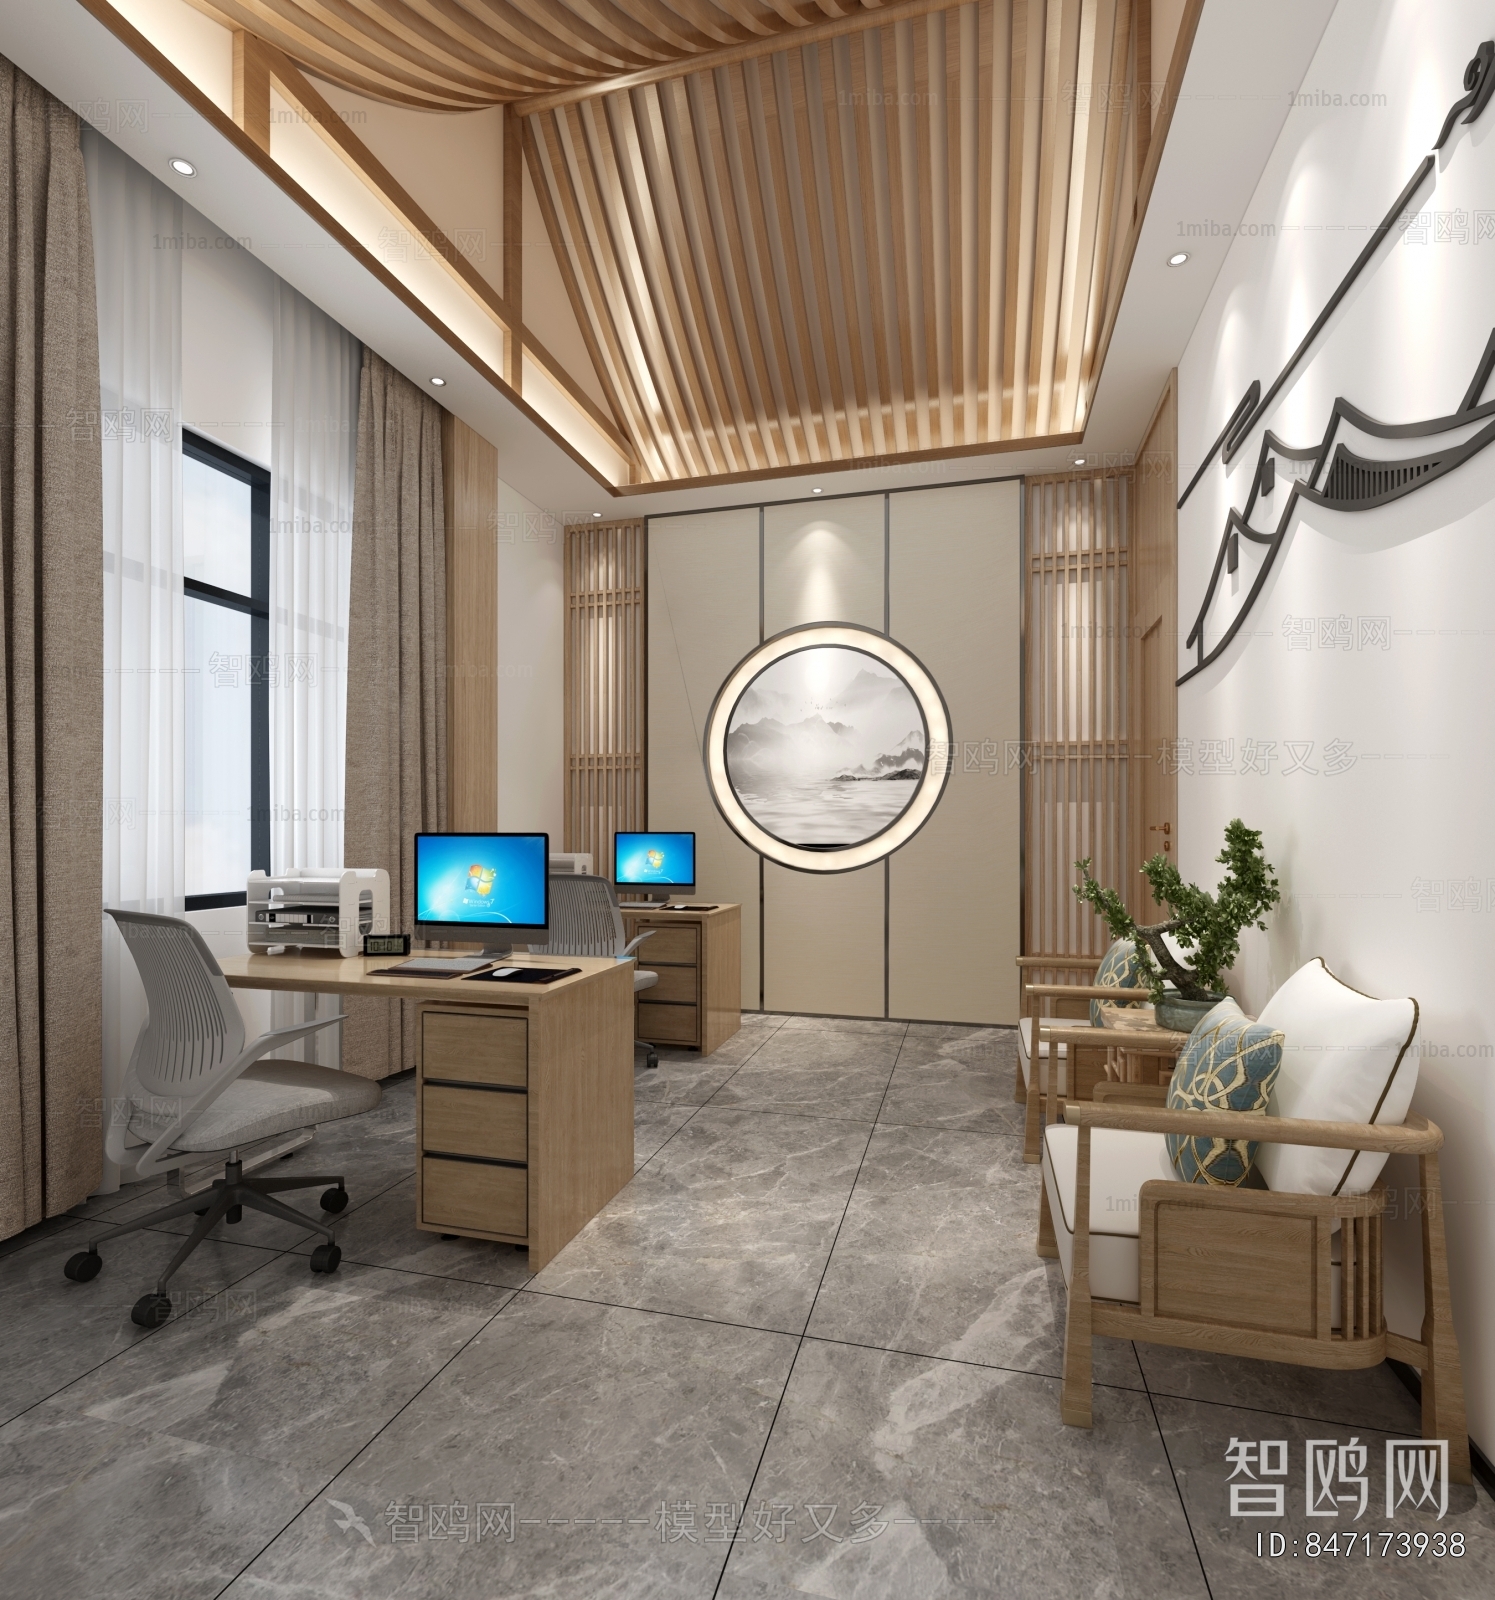 New Chinese Style Staff Area